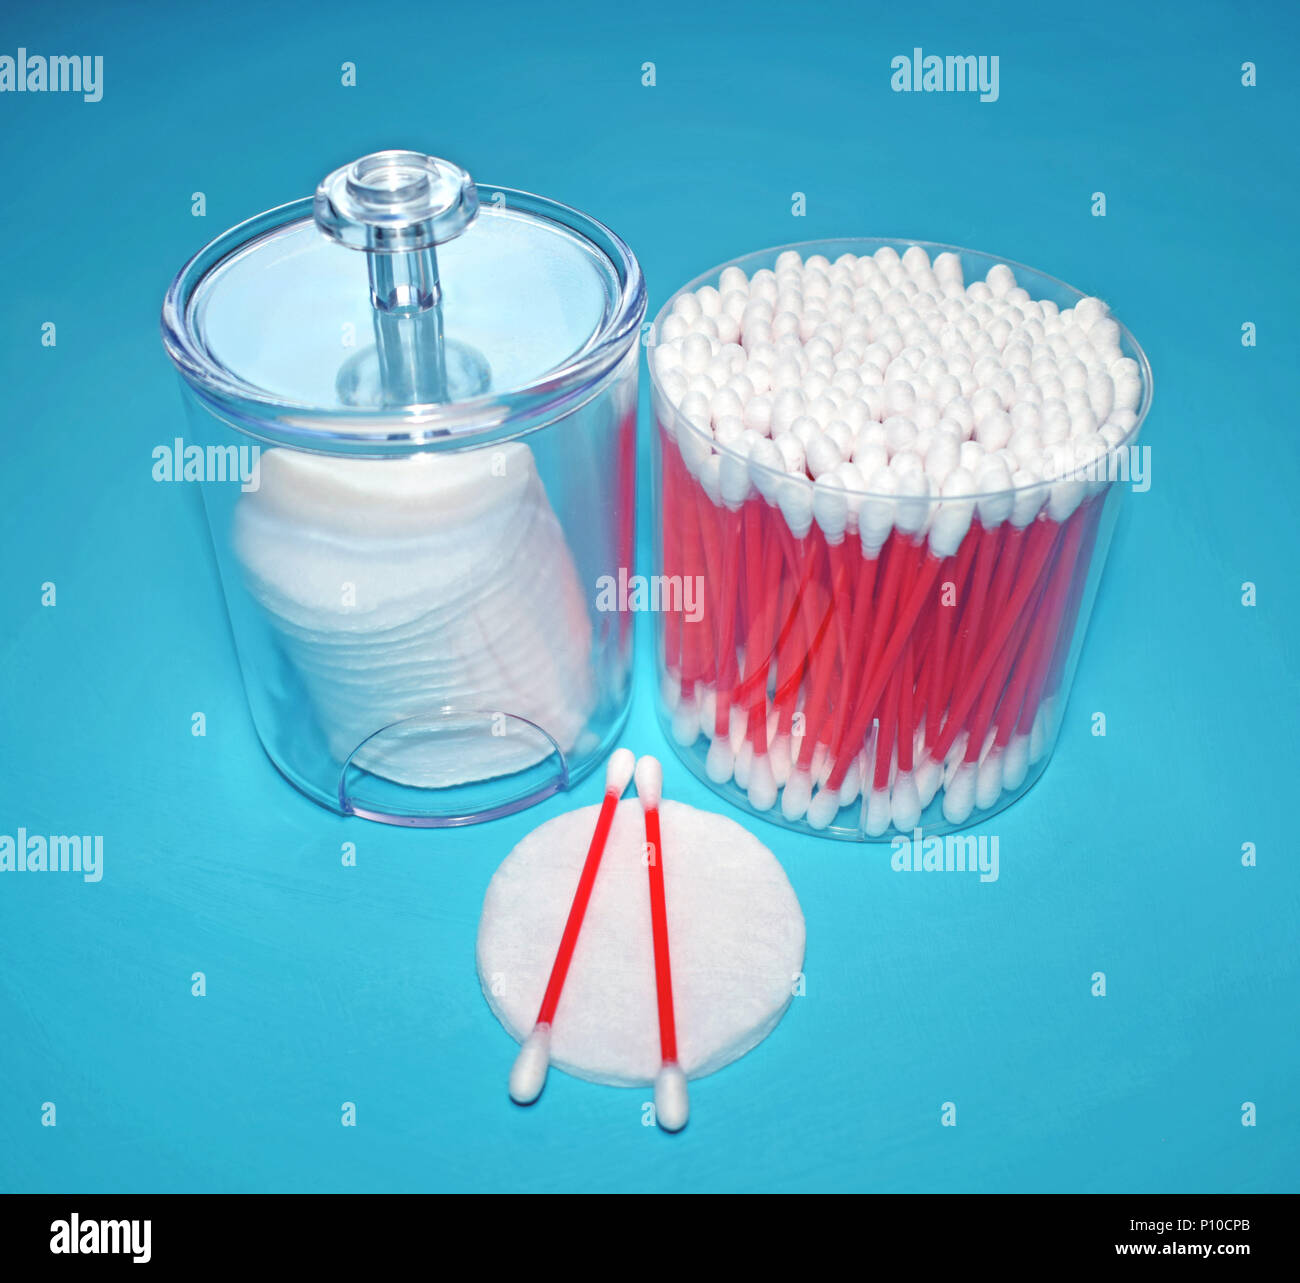 cotton pads and swabs Stock Photo